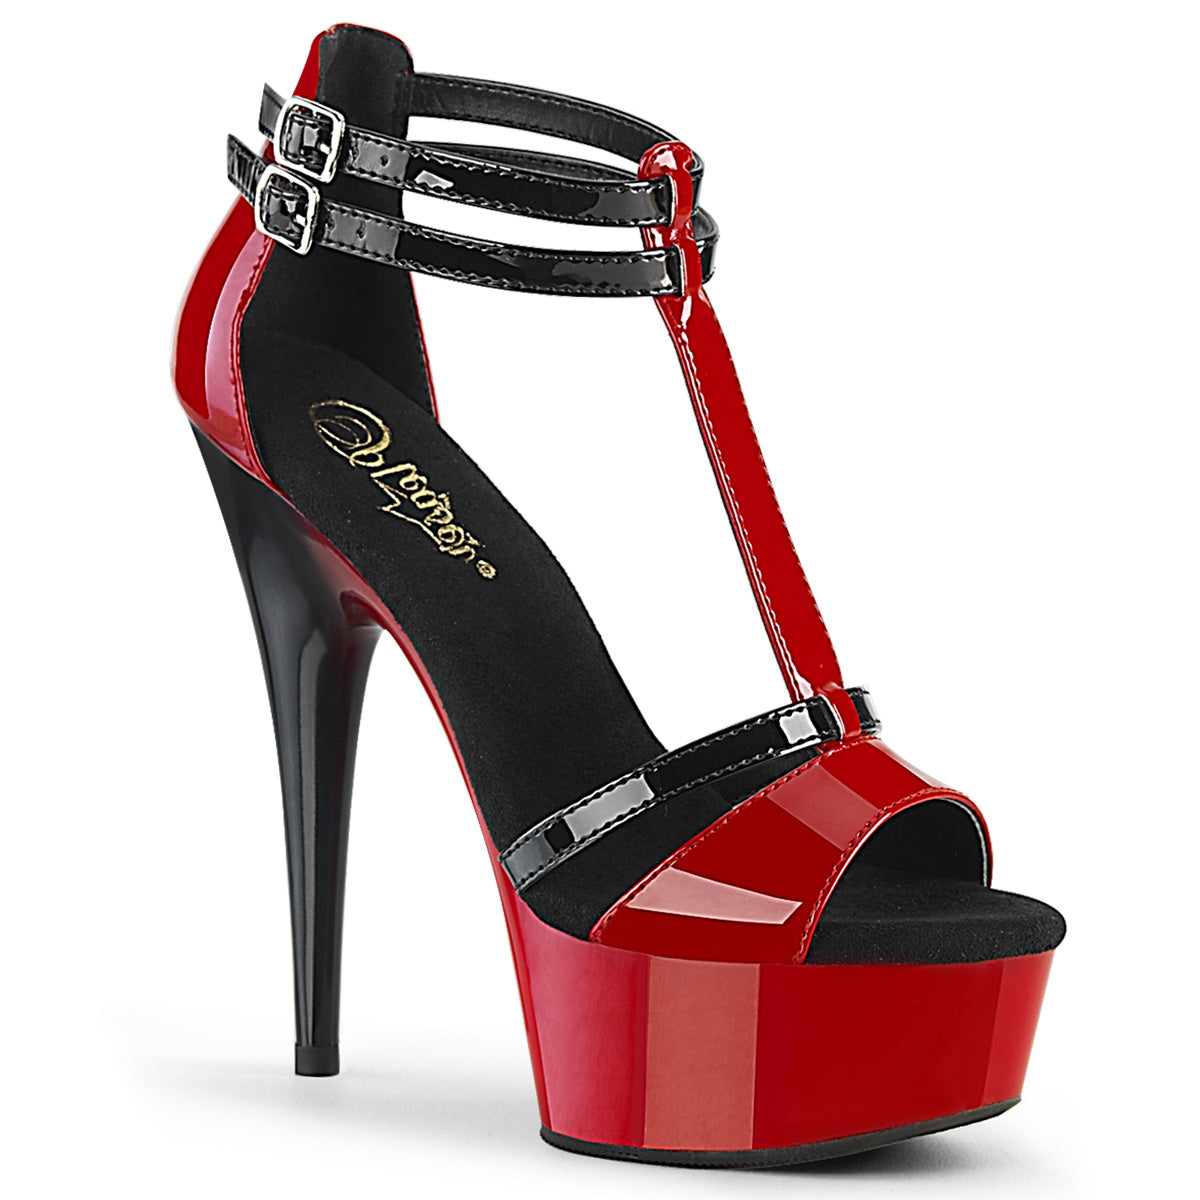 Pleaser Sandalias para mujer DELIGHT-663 Red-Blk Pat / Red-Blk